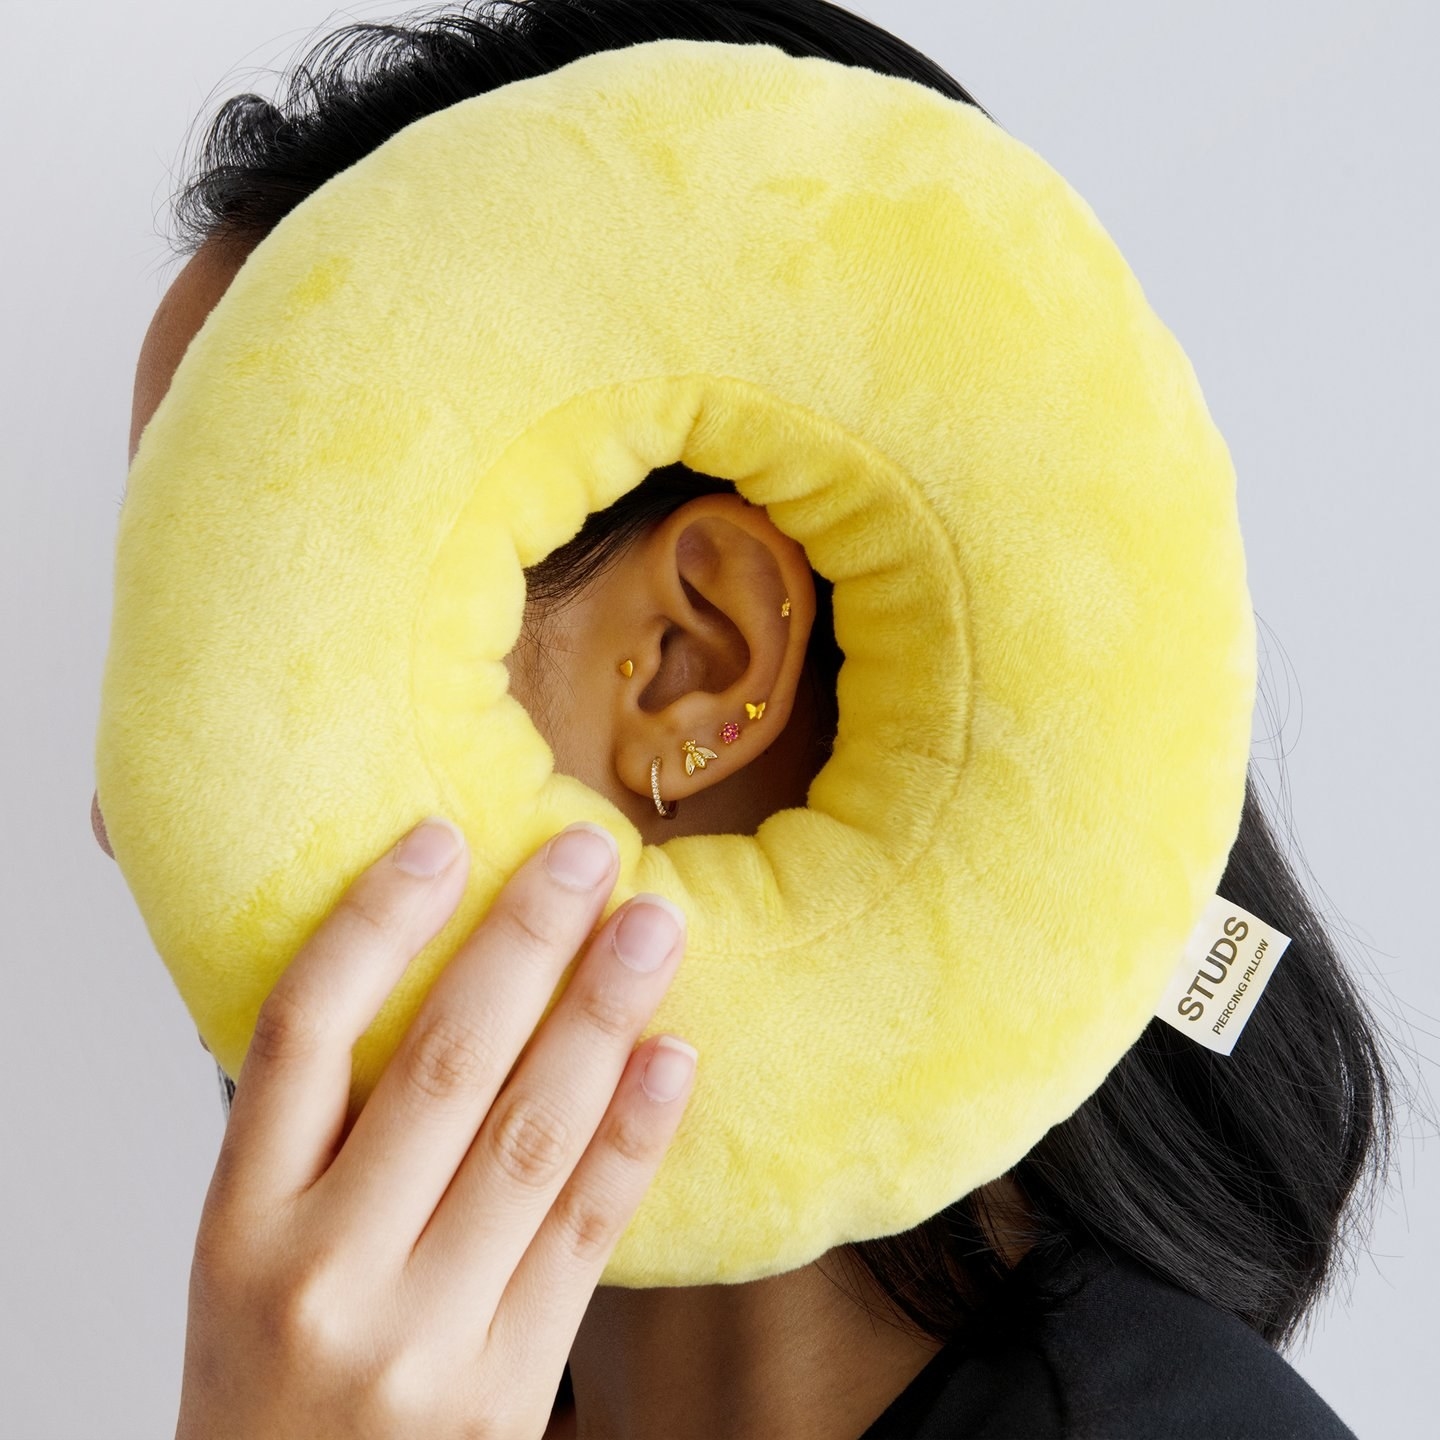 model holding a yellow circular pillow with a hole in the middle for your ear to rest